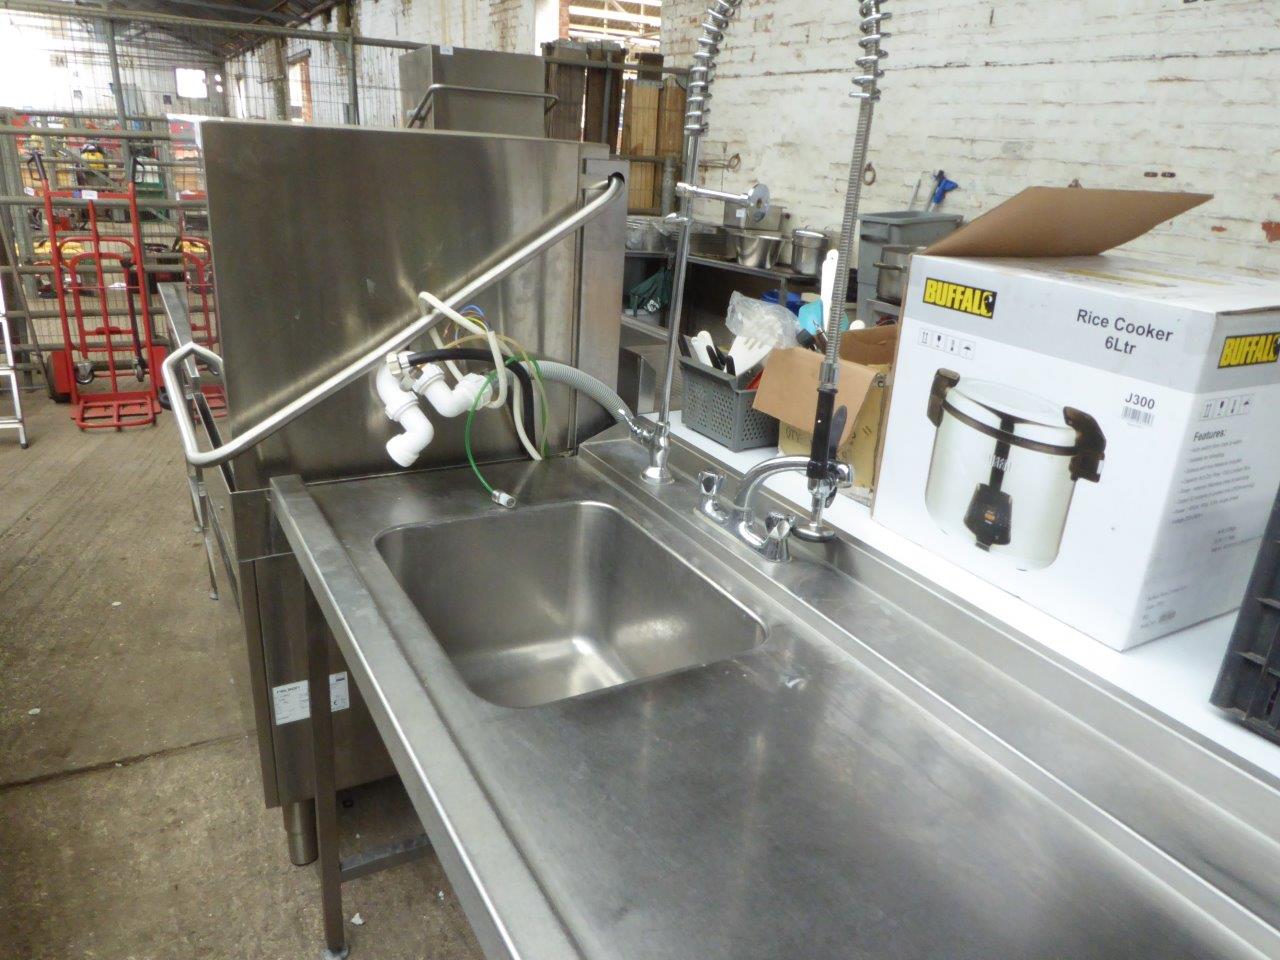 Nelson pass-through dishwasher and table. - Image 2 of 2